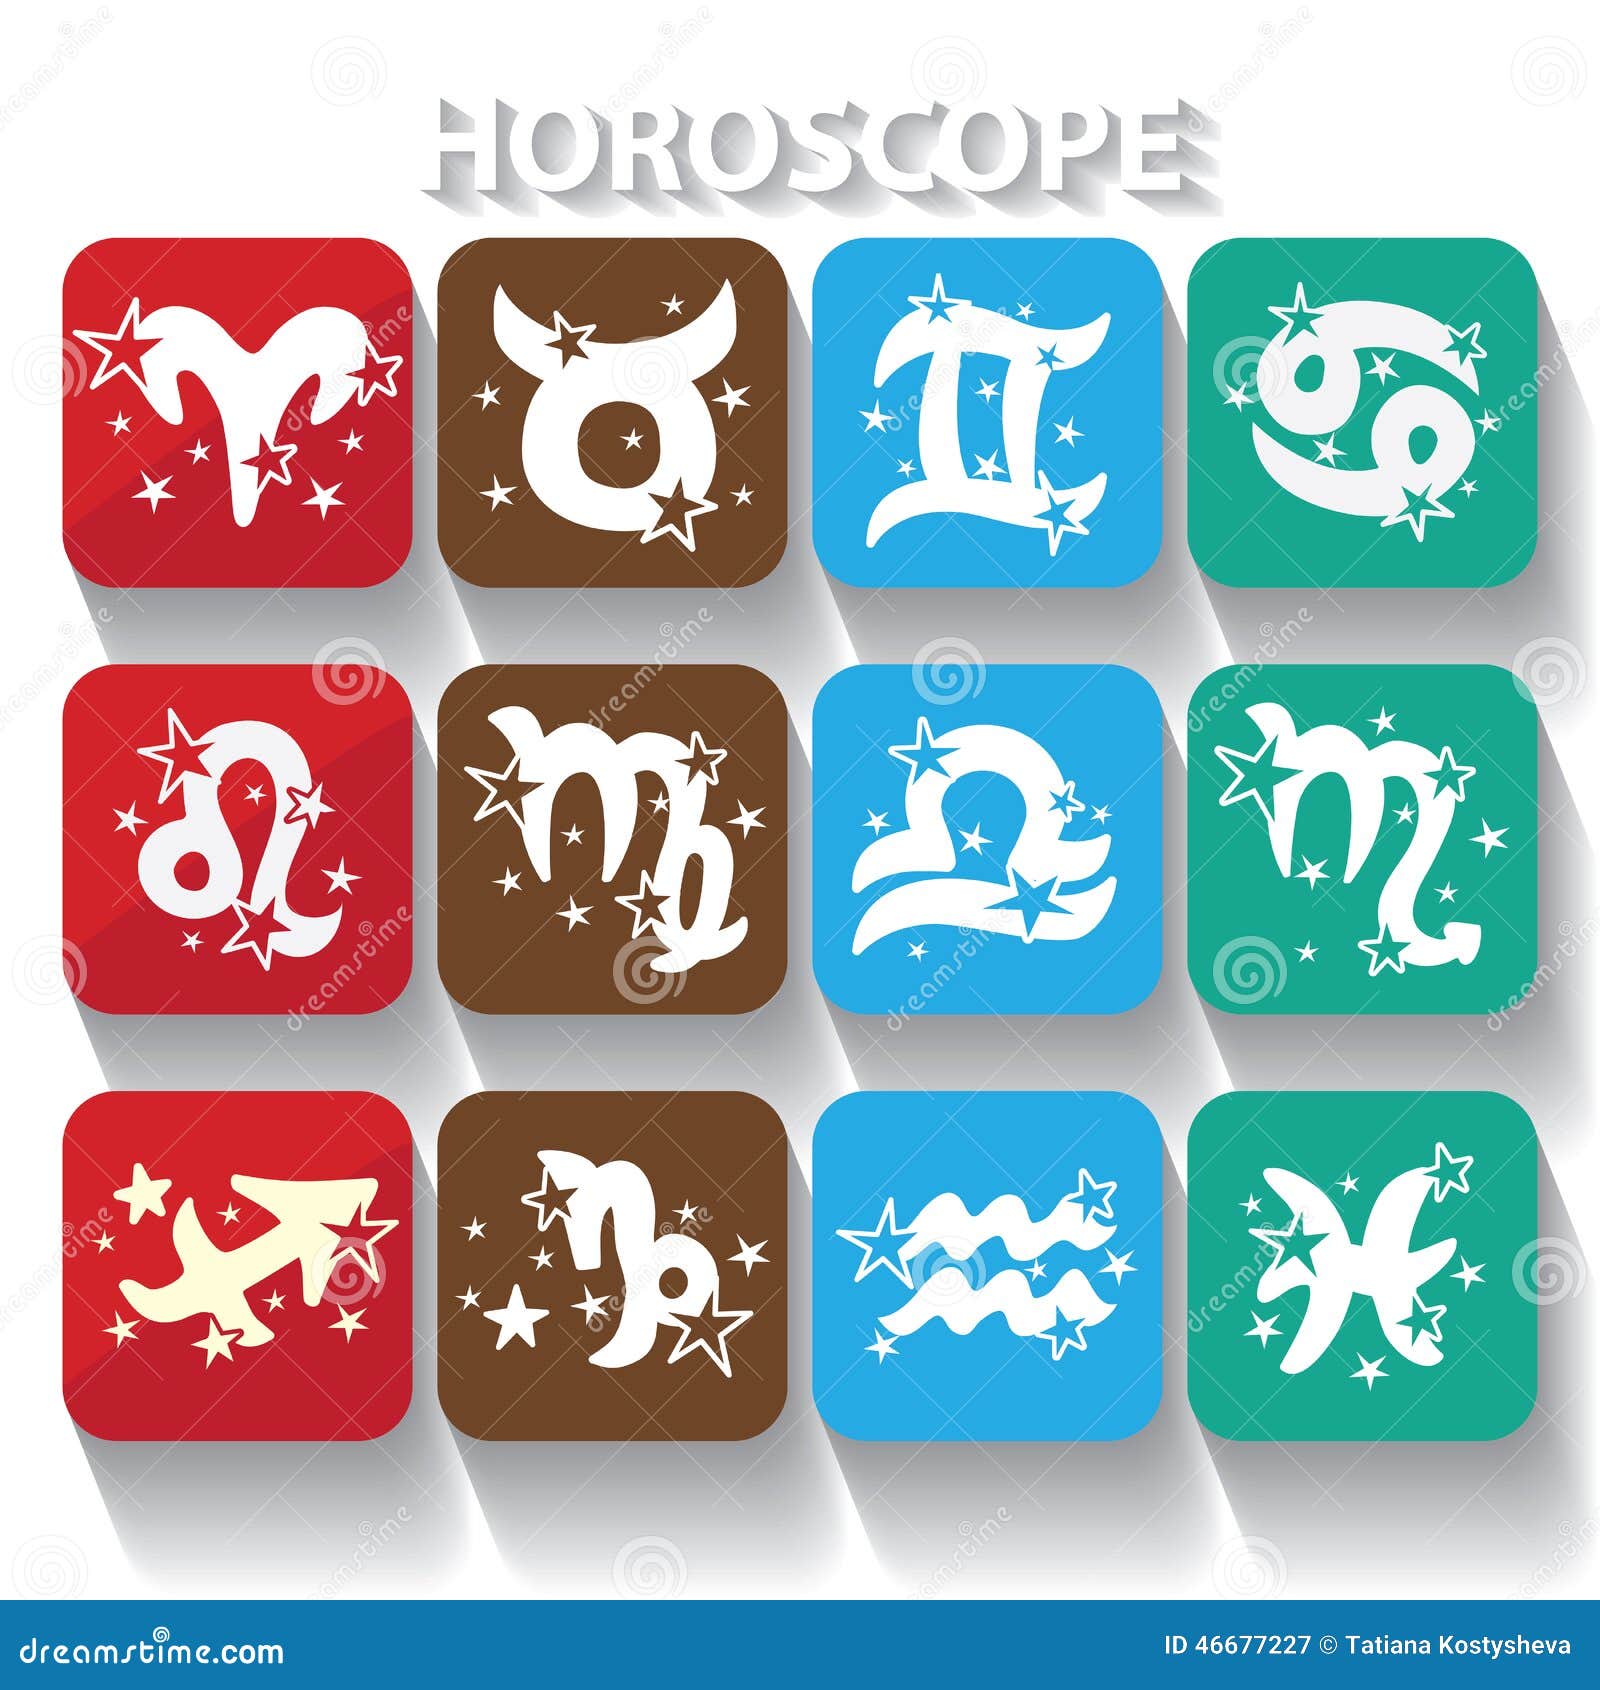 Horoscope Icons .Zodiac Signs.Symbol of Elements Stock Vector ...